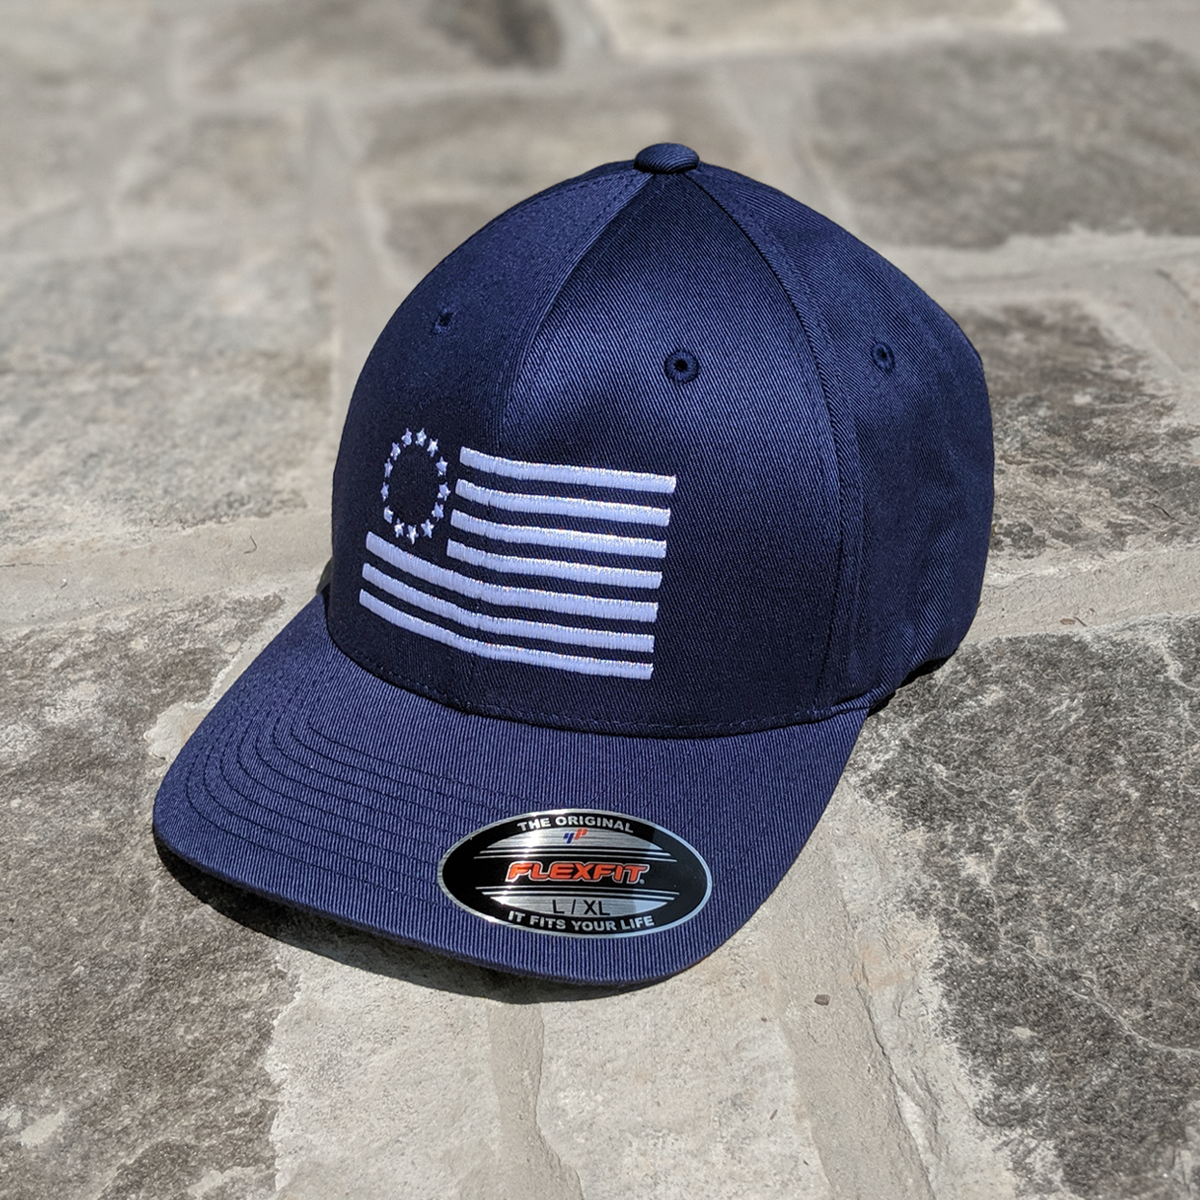 Betsy Ross Flag Flexfit features the Betsy Ross Flag embroidered on a blue flexfit hat.